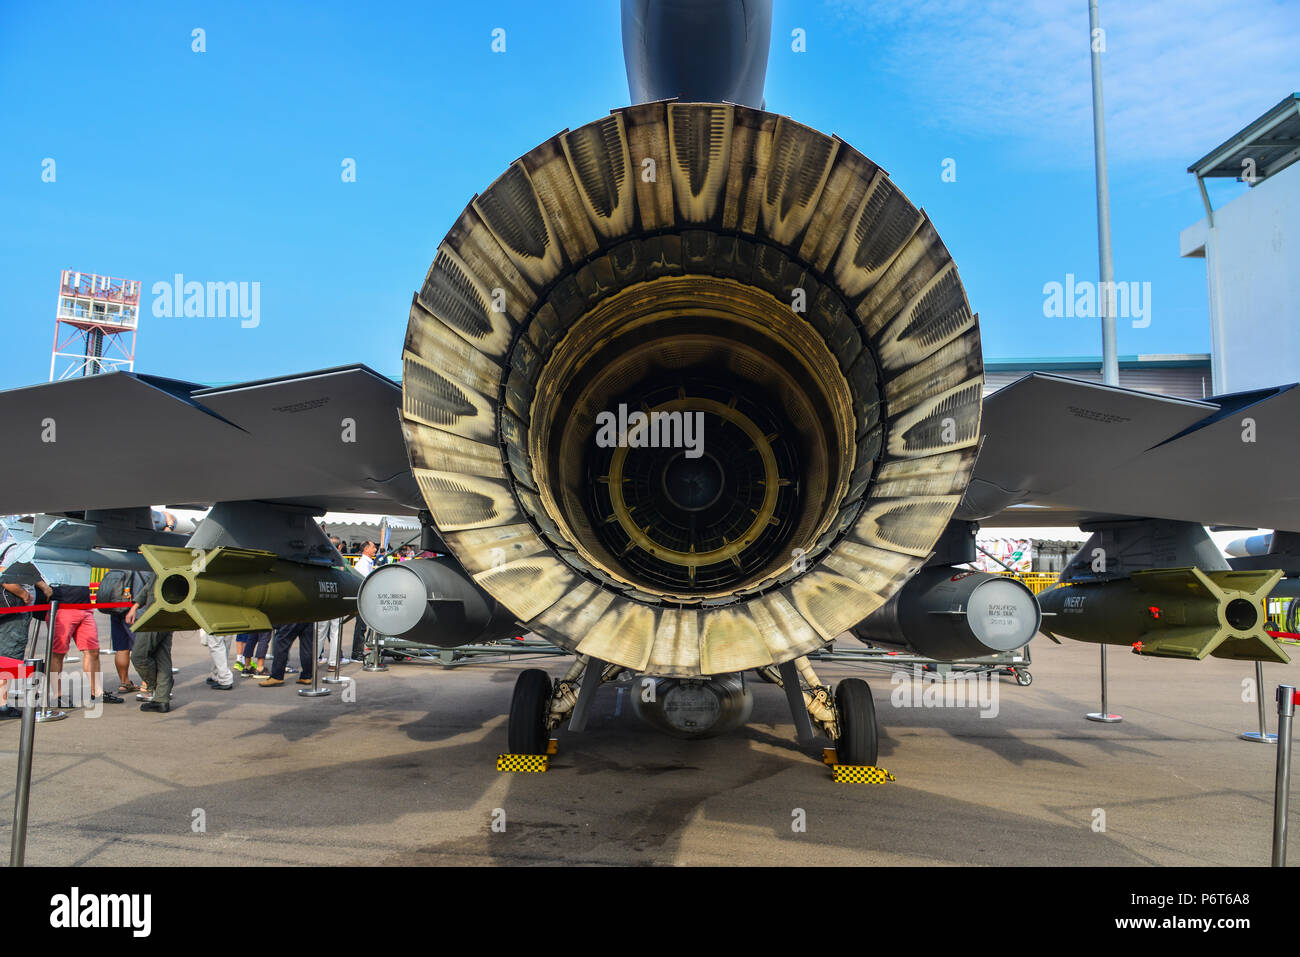 Singapore - Feb 10, 2018. A Lockheed Martin F-16 Fighting Falcon fighter aircraft of Singapore Air Force (RSAF) in Changi, Singapore. Stock Photo